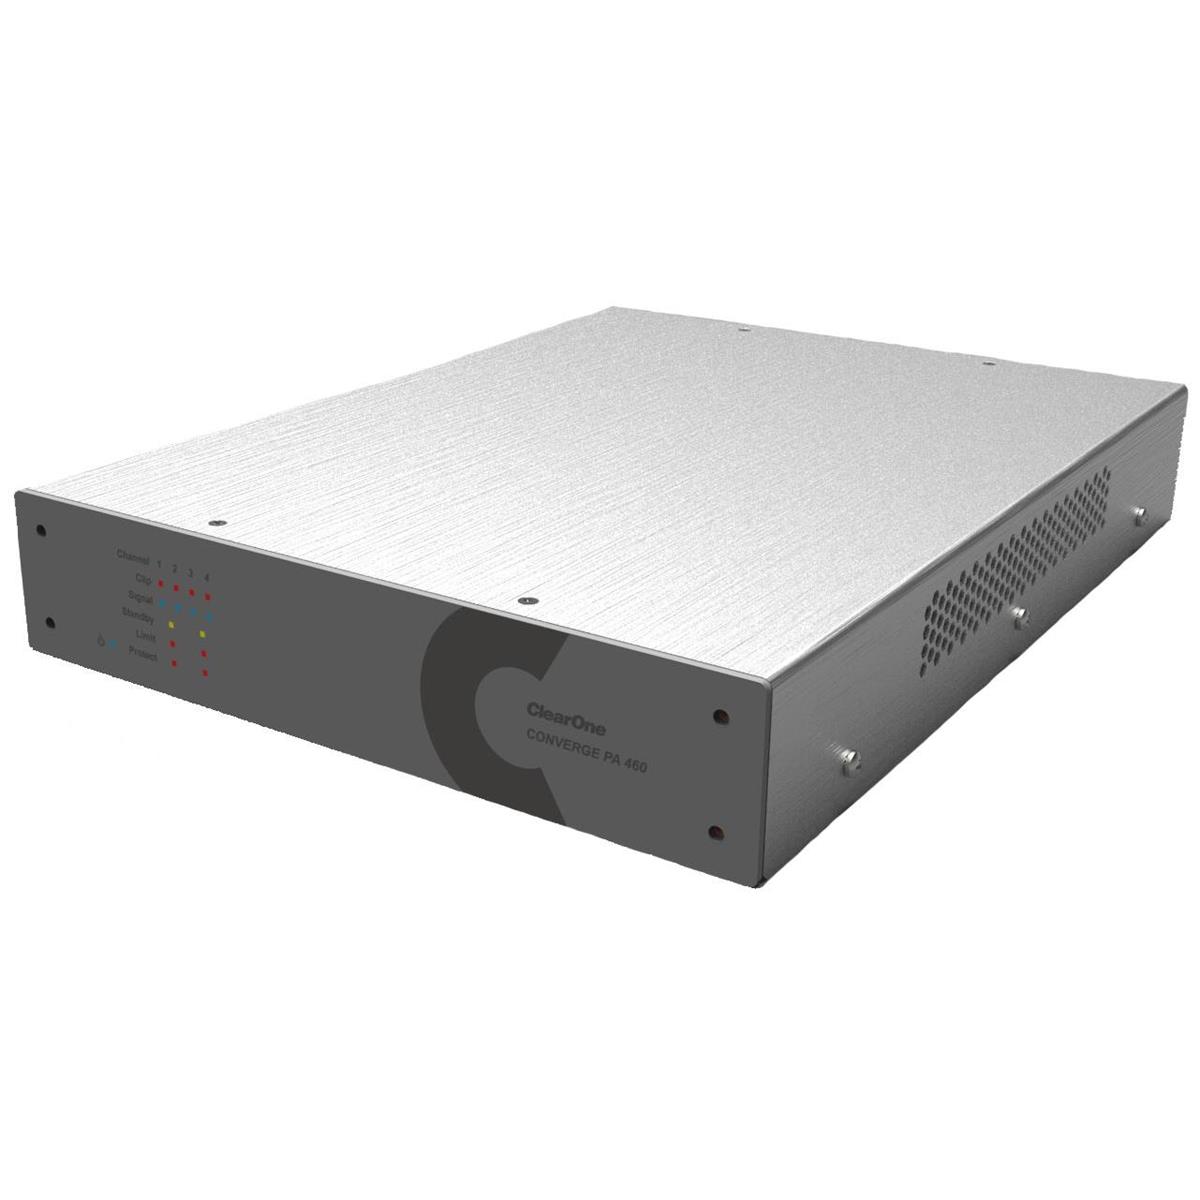 Image of ClearOne CONVERGE PA 460 4 Channel x 60W Class-D Audio Power Amplifier